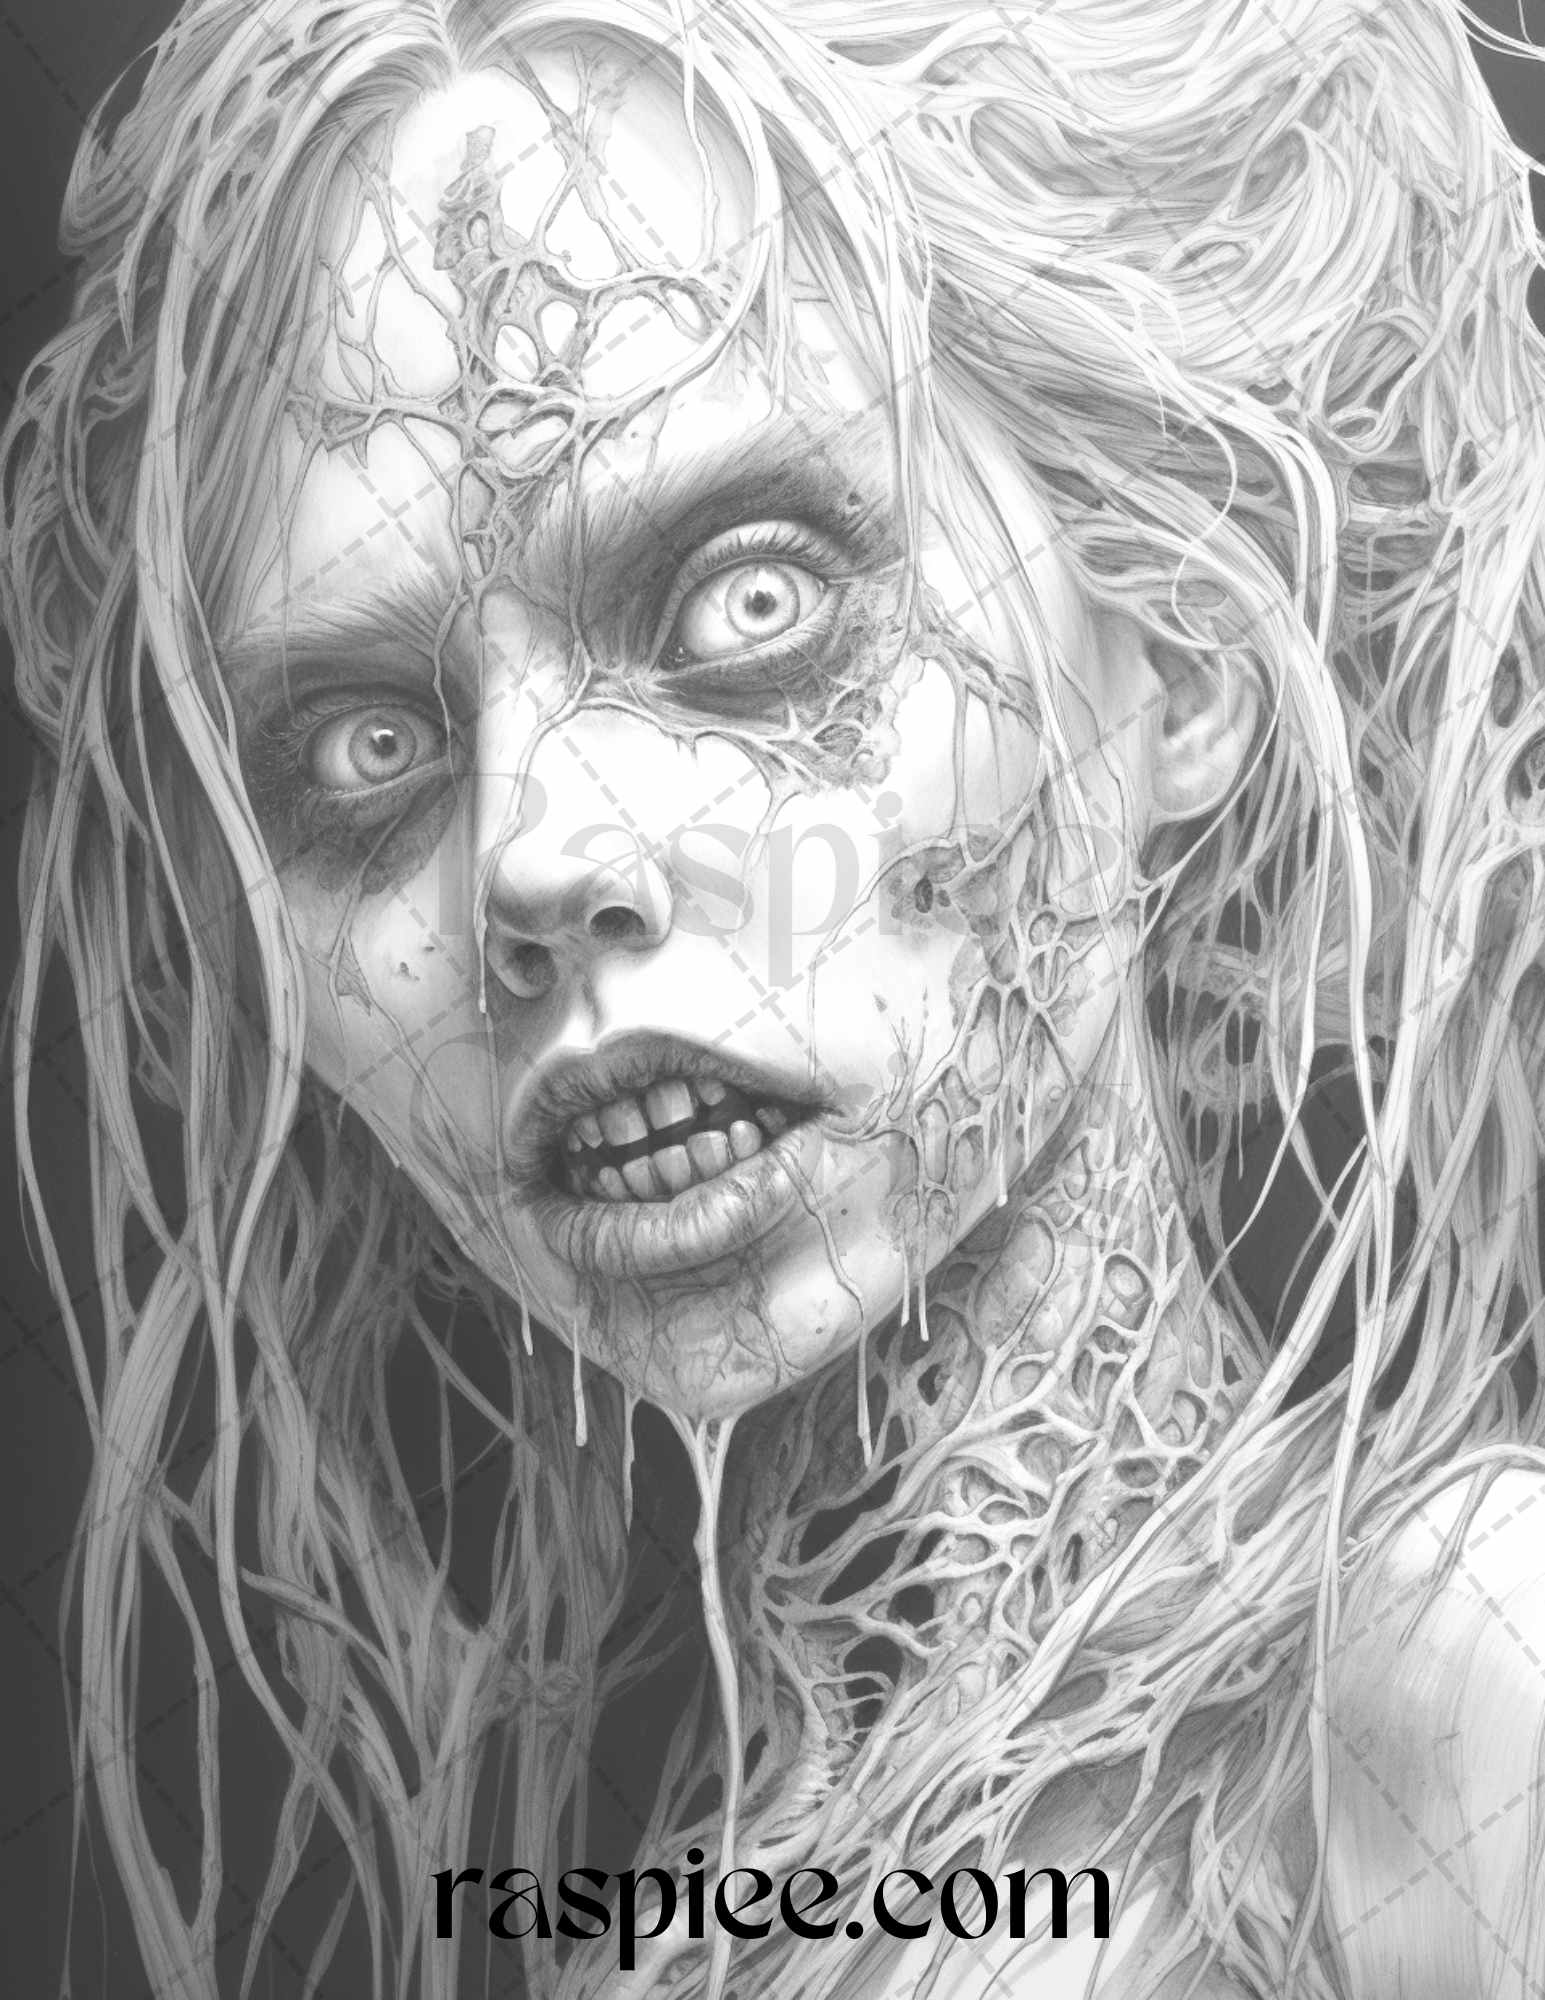 Scary Zombie Girls Grayscale Coloring Page, Creepy Fantasy Art for Adult Coloring Book, Spooky Zombies Printable Coloring Sheet, Halloween Coloring Pages for Adults, Horror-Themed Grayscale Illustration, High-Resolution Printable Coloring Art, Macabre Coloring for Adults, Undead Girls Halloween Coloring, Zombie Girls Instant Download PDF, Haunted Coloring Images for Adults